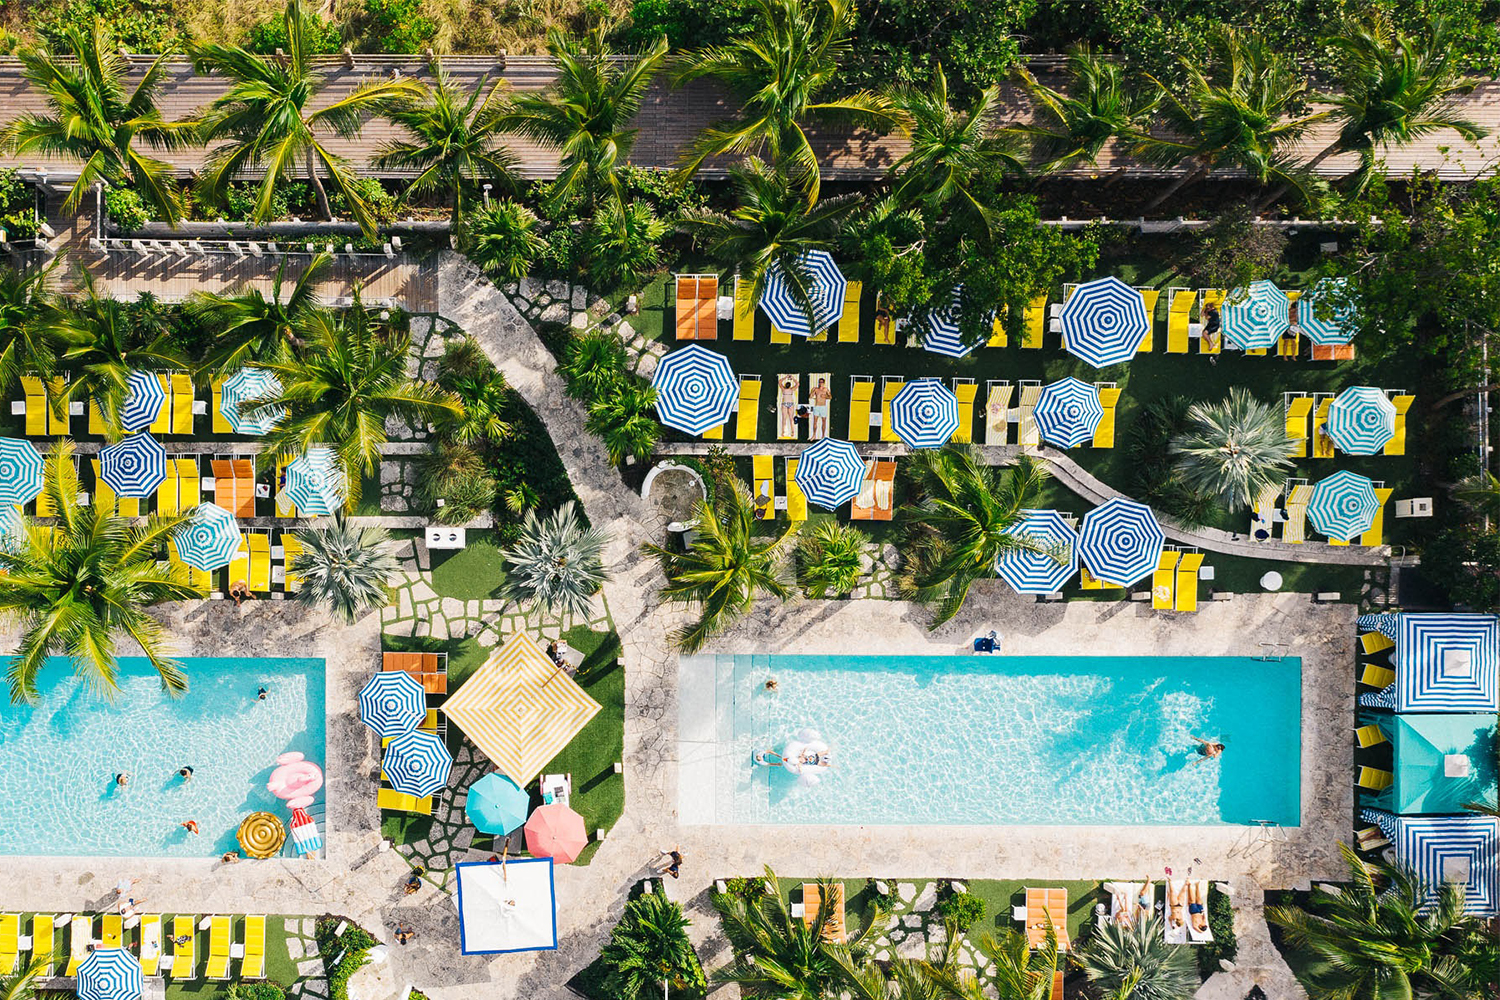 A bird's-eye view of the pools at The Confidante Miami Beach, an affordable but chic oceanfront hotel